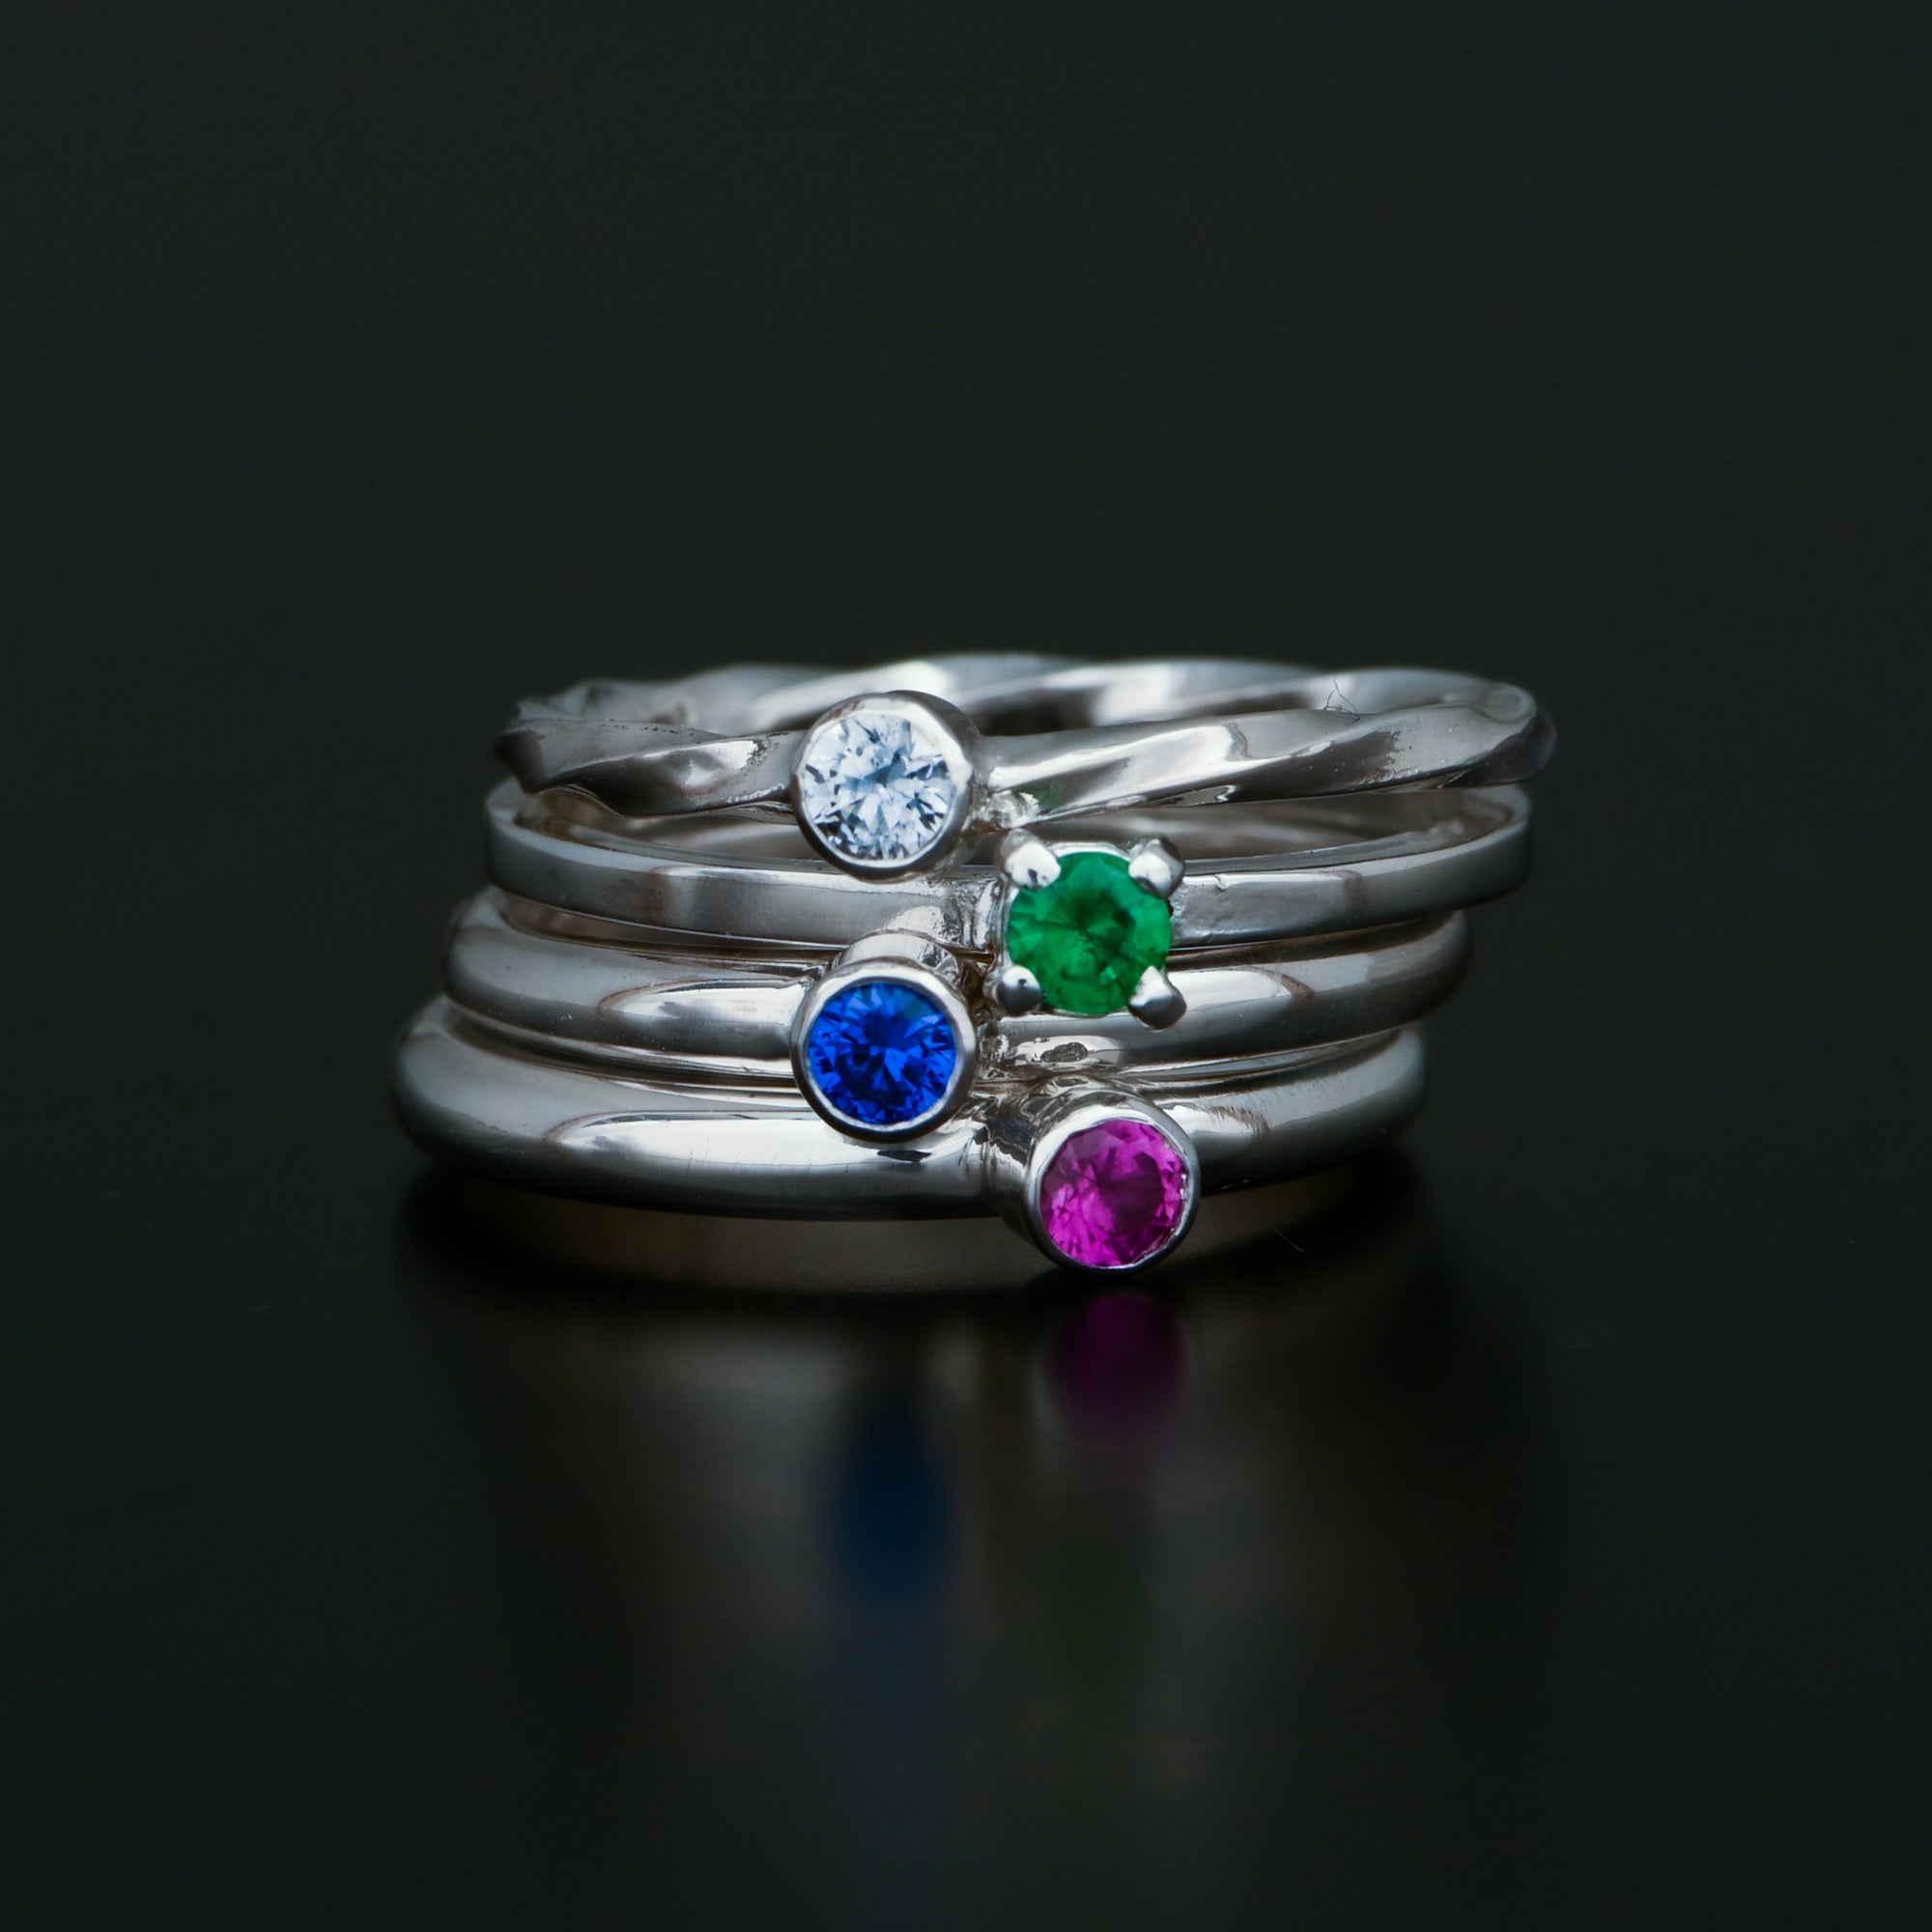 Solitaires and Stacks with Stones - March 24